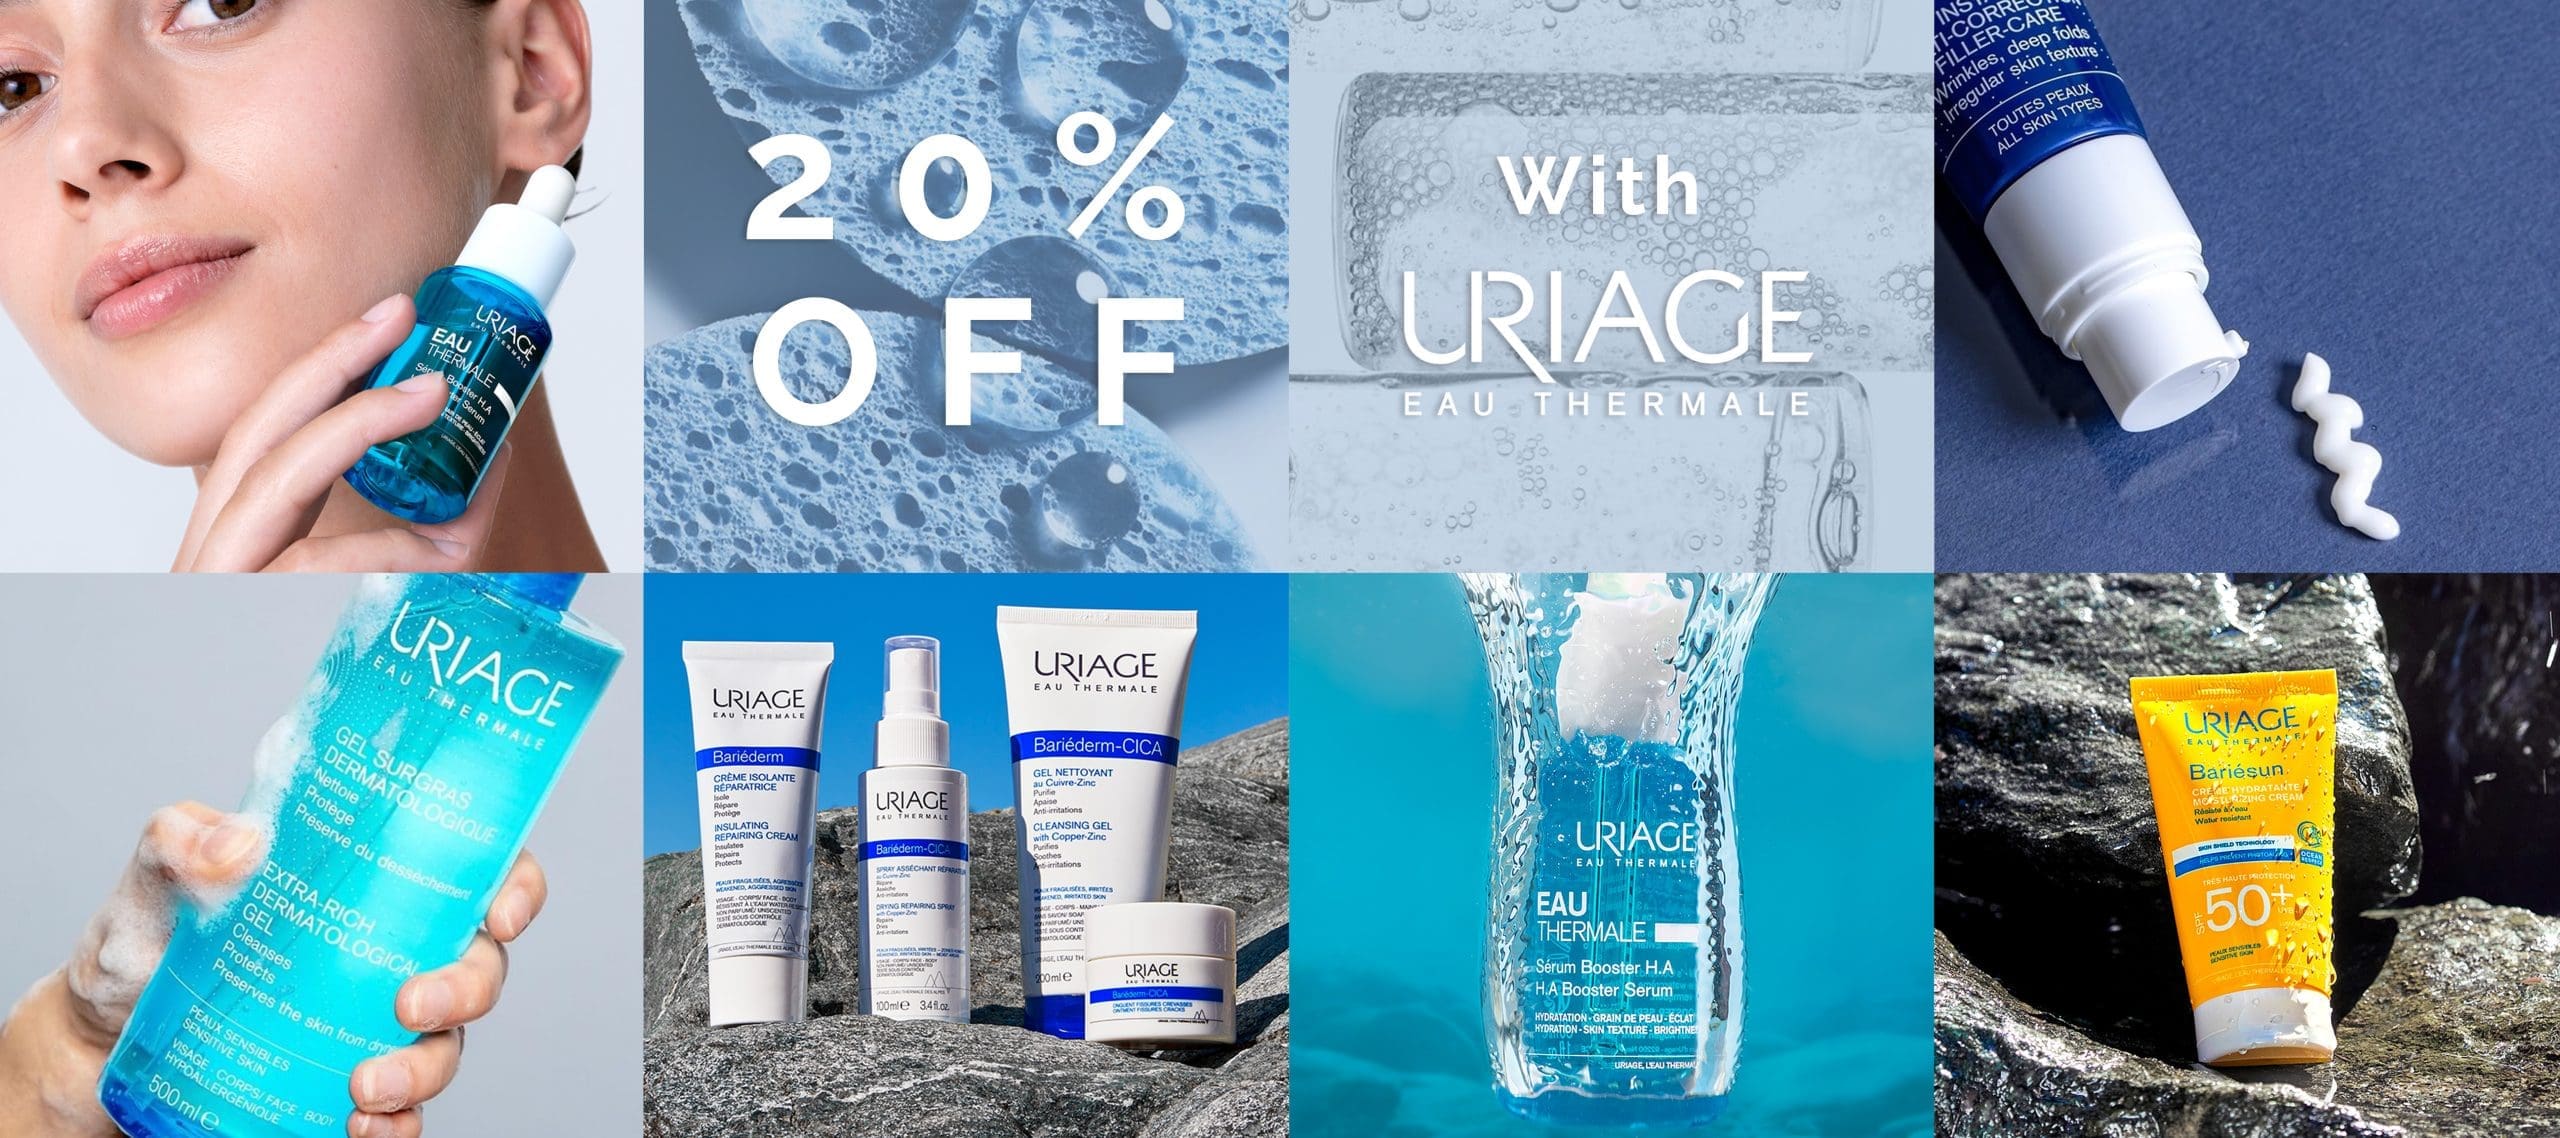 Obagi Brand of the week up to 25% off sale for 10 days